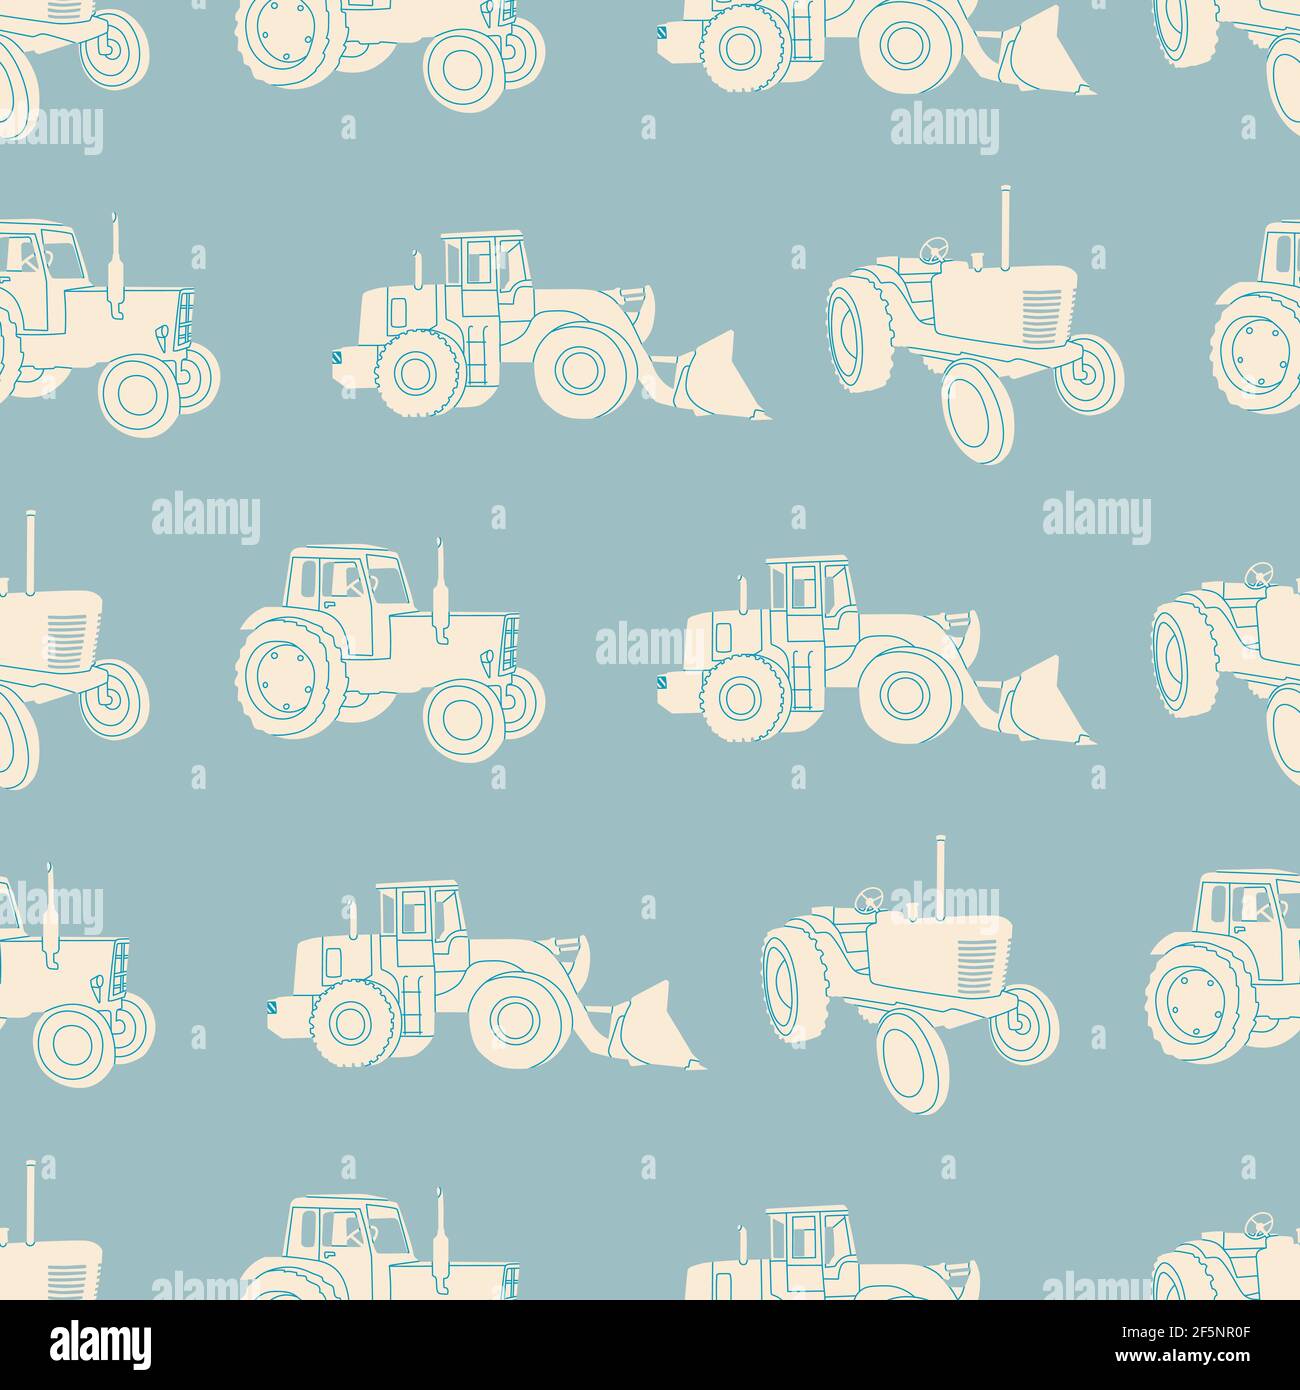 Vector seamless pattern. Tractor, harvester and agrimotor. Retro style, print on paper, fabric. Agro concept. Stock Vector